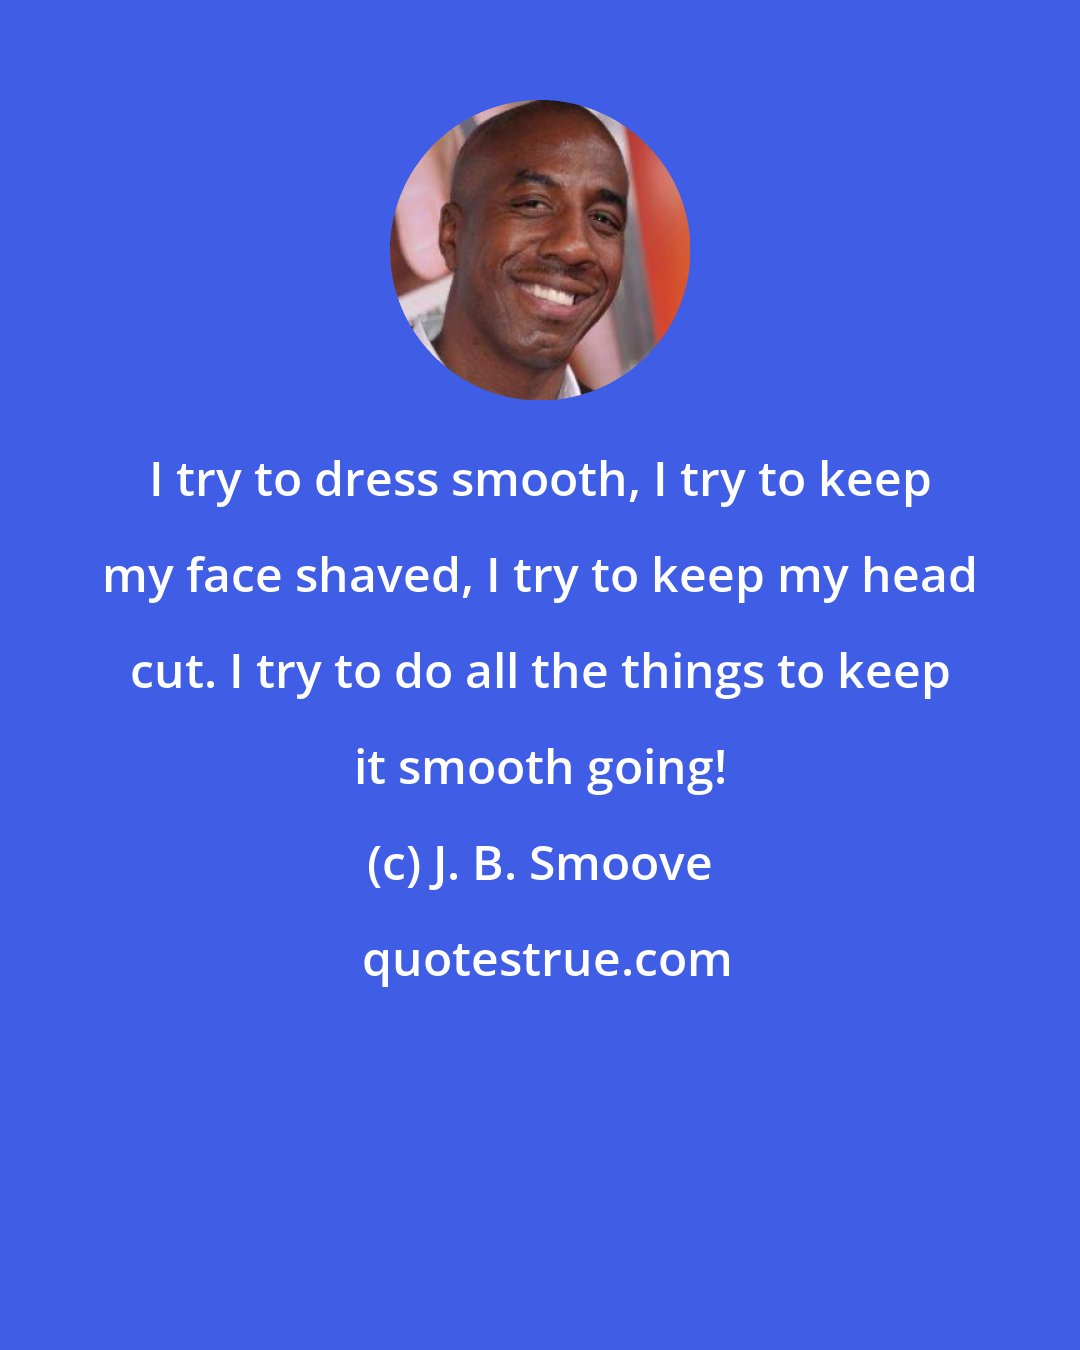 J. B. Smoove: I try to dress smooth, I try to keep my face shaved, I try to keep my head cut. I try to do all the things to keep it smooth going!